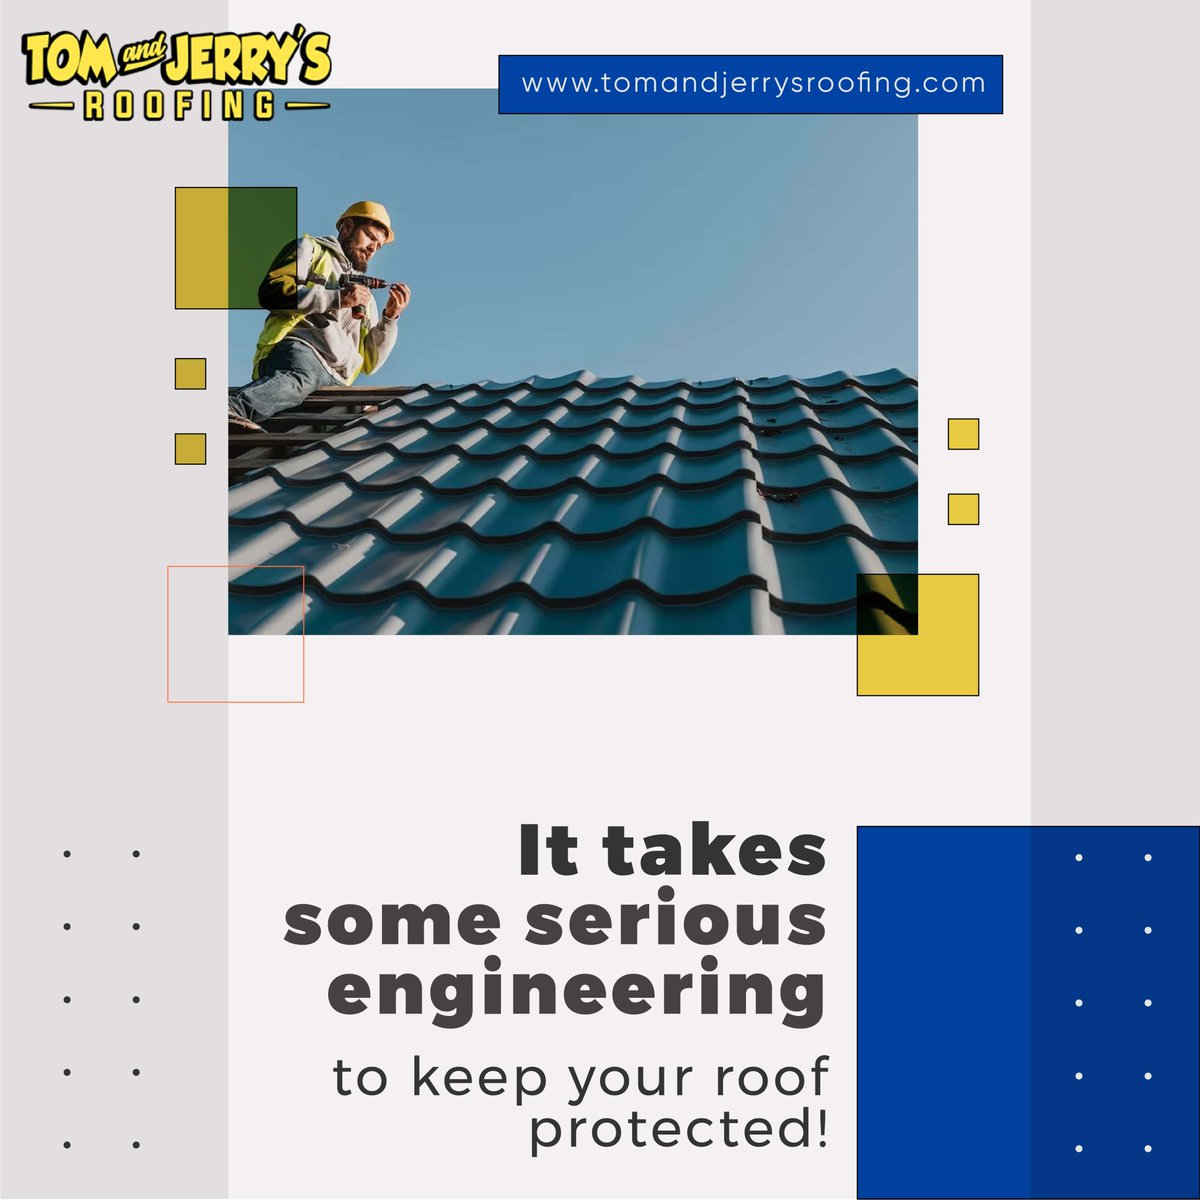 Roofs may age, but with Tom and Jerry's Roofing, they can always shine like new. Our expertise knows no bounds, turning old roofs into lasting masterpieces. Experience the magic of restoration!

#RoofRevival #TomandJerry’sroofing #RoofingFacts #ResilientRoofs